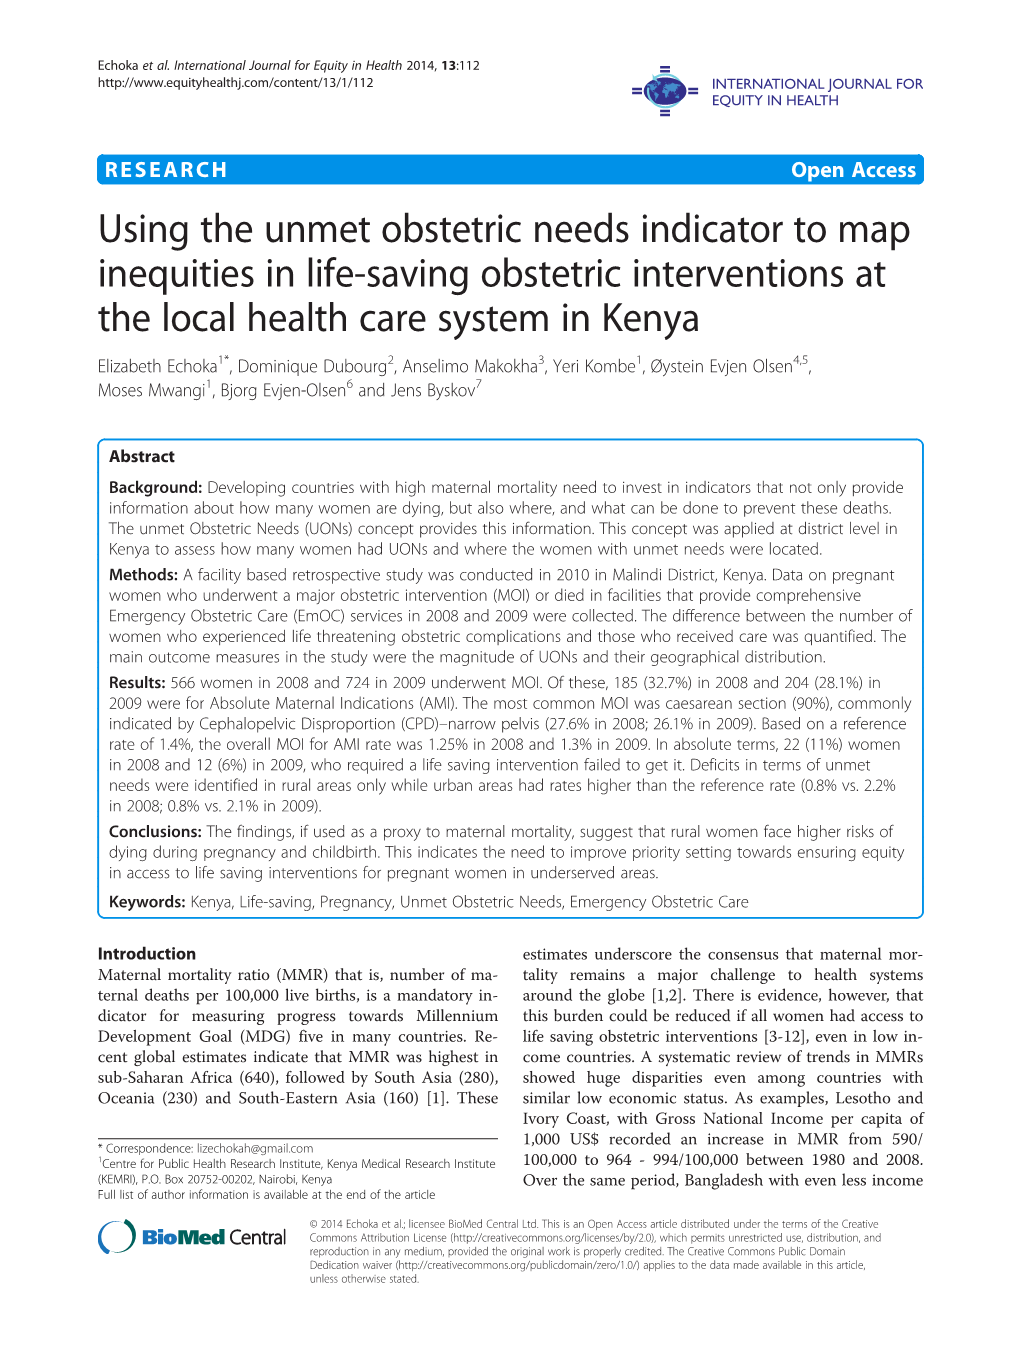 Using the Unmet Obstetric Needs Indicator to Map Inequities in Life